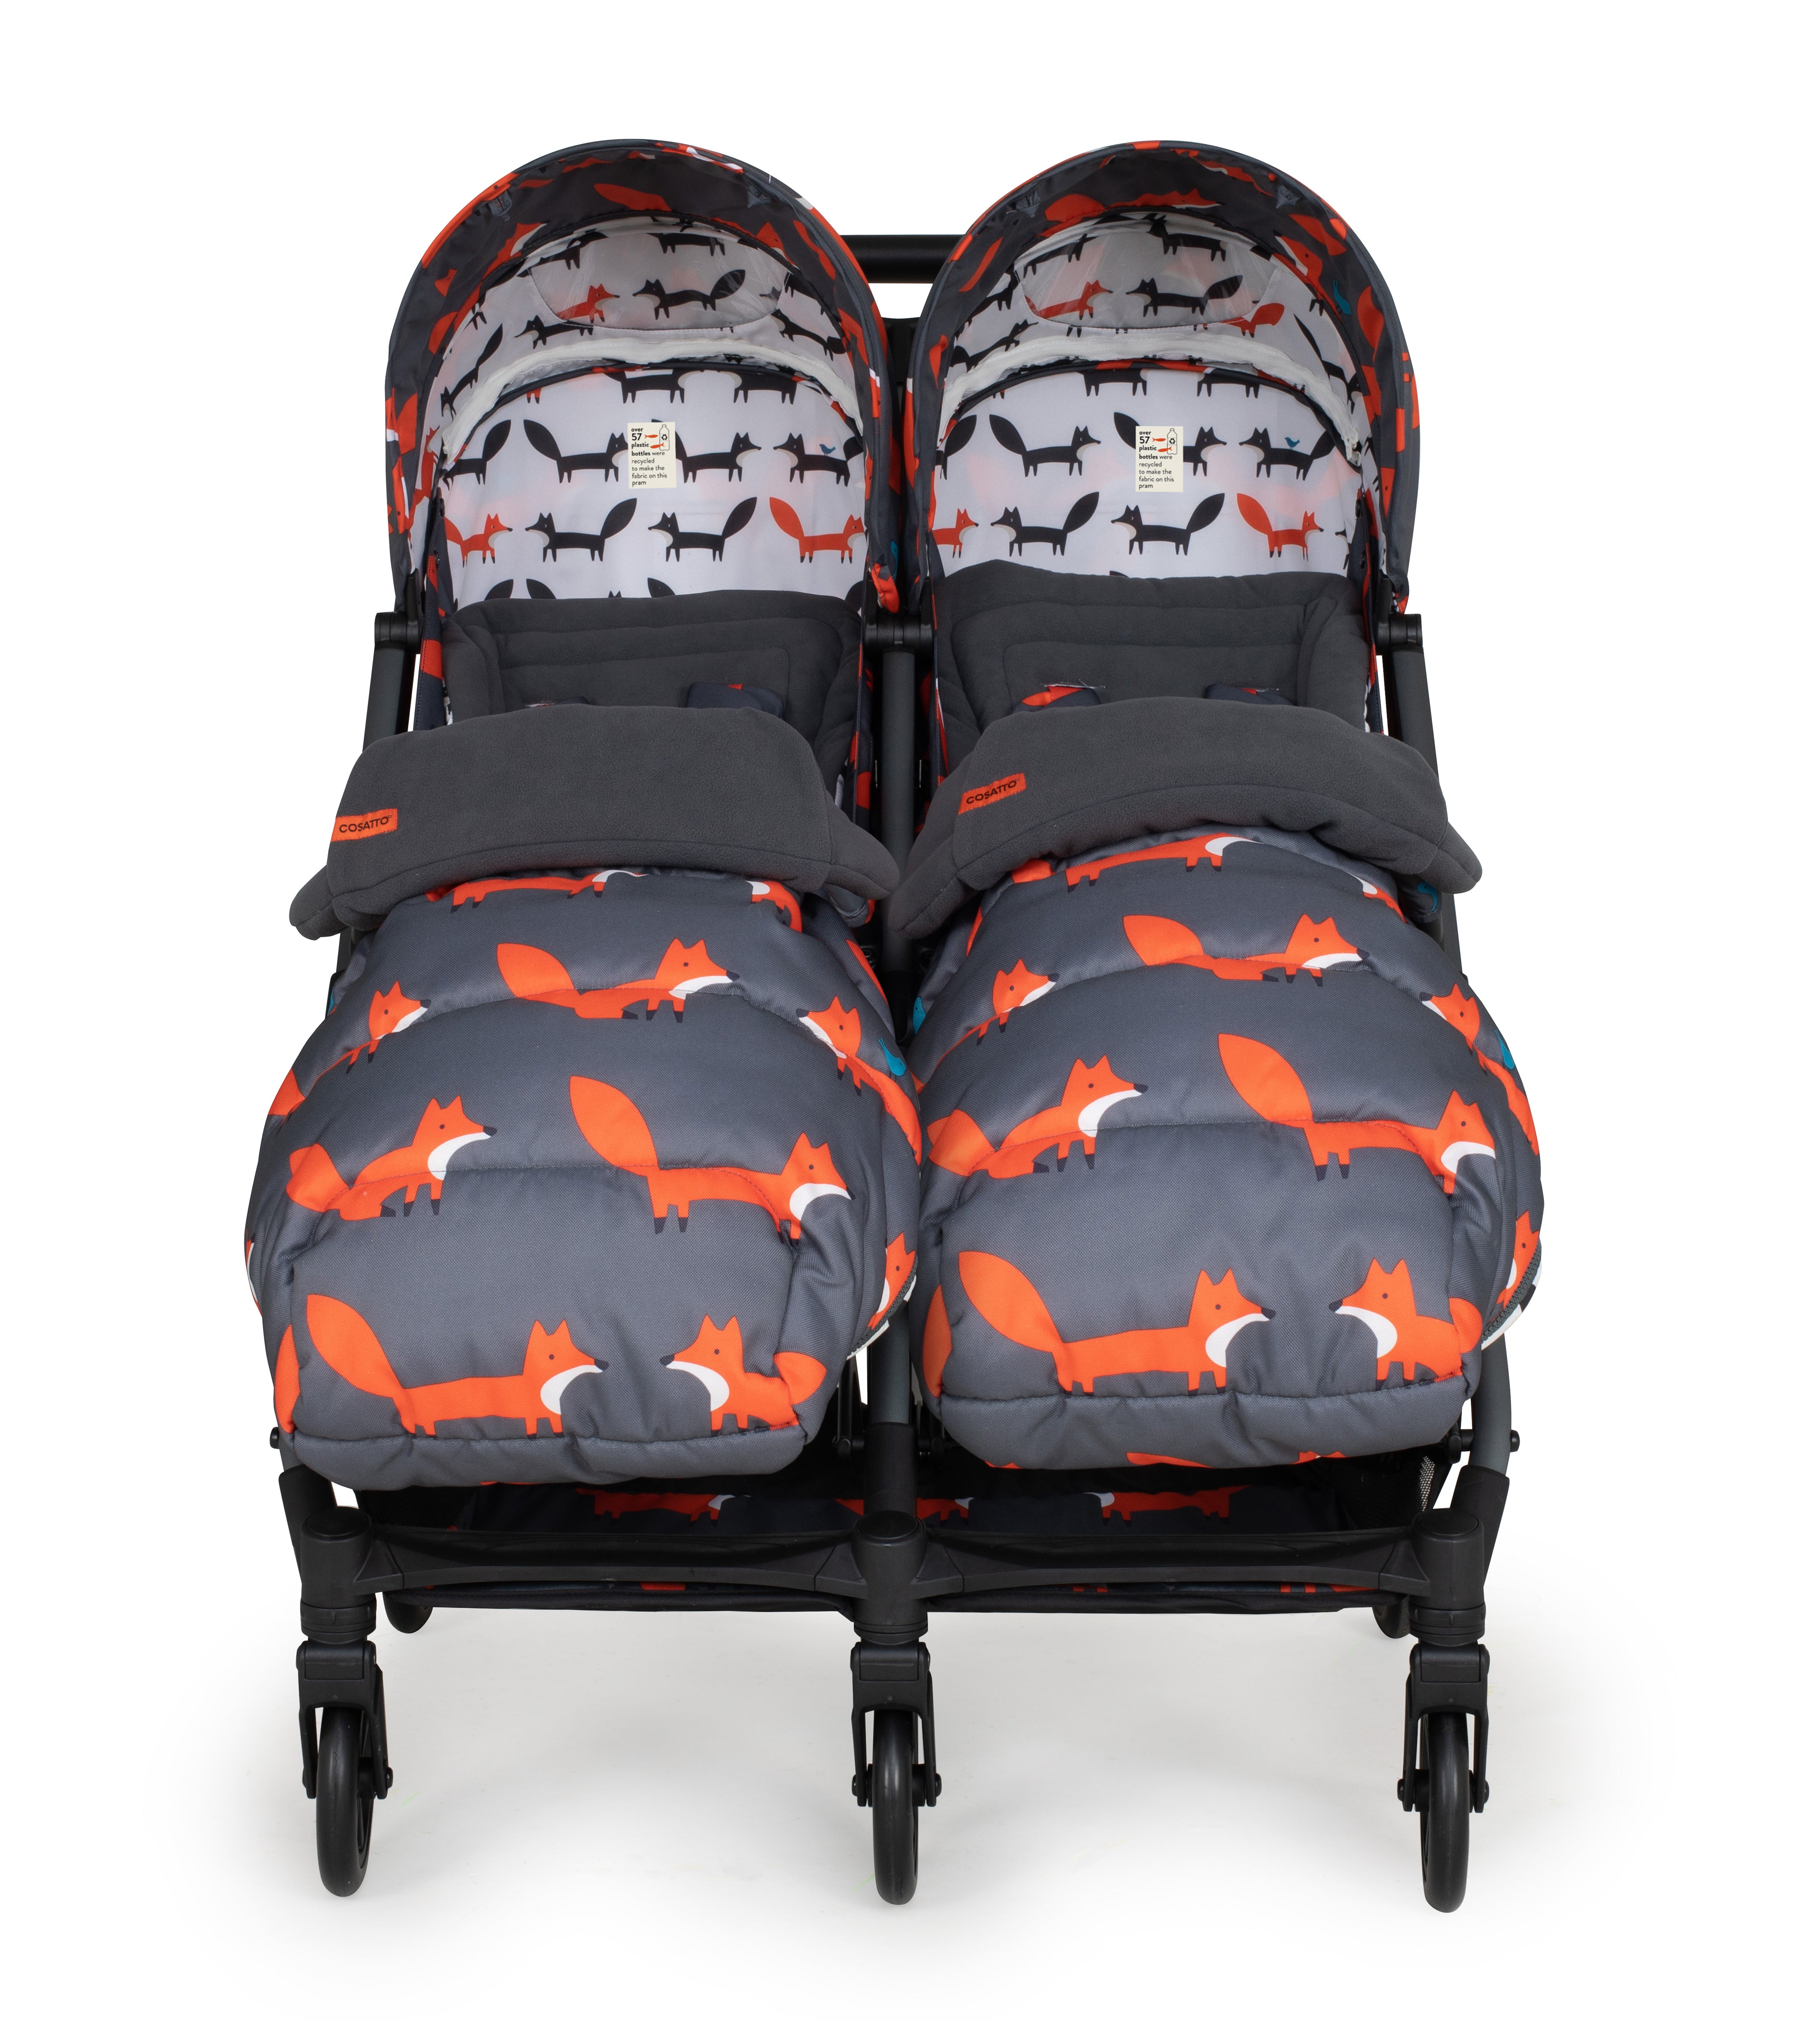 Woosh Double buggy - charcoal mister fox